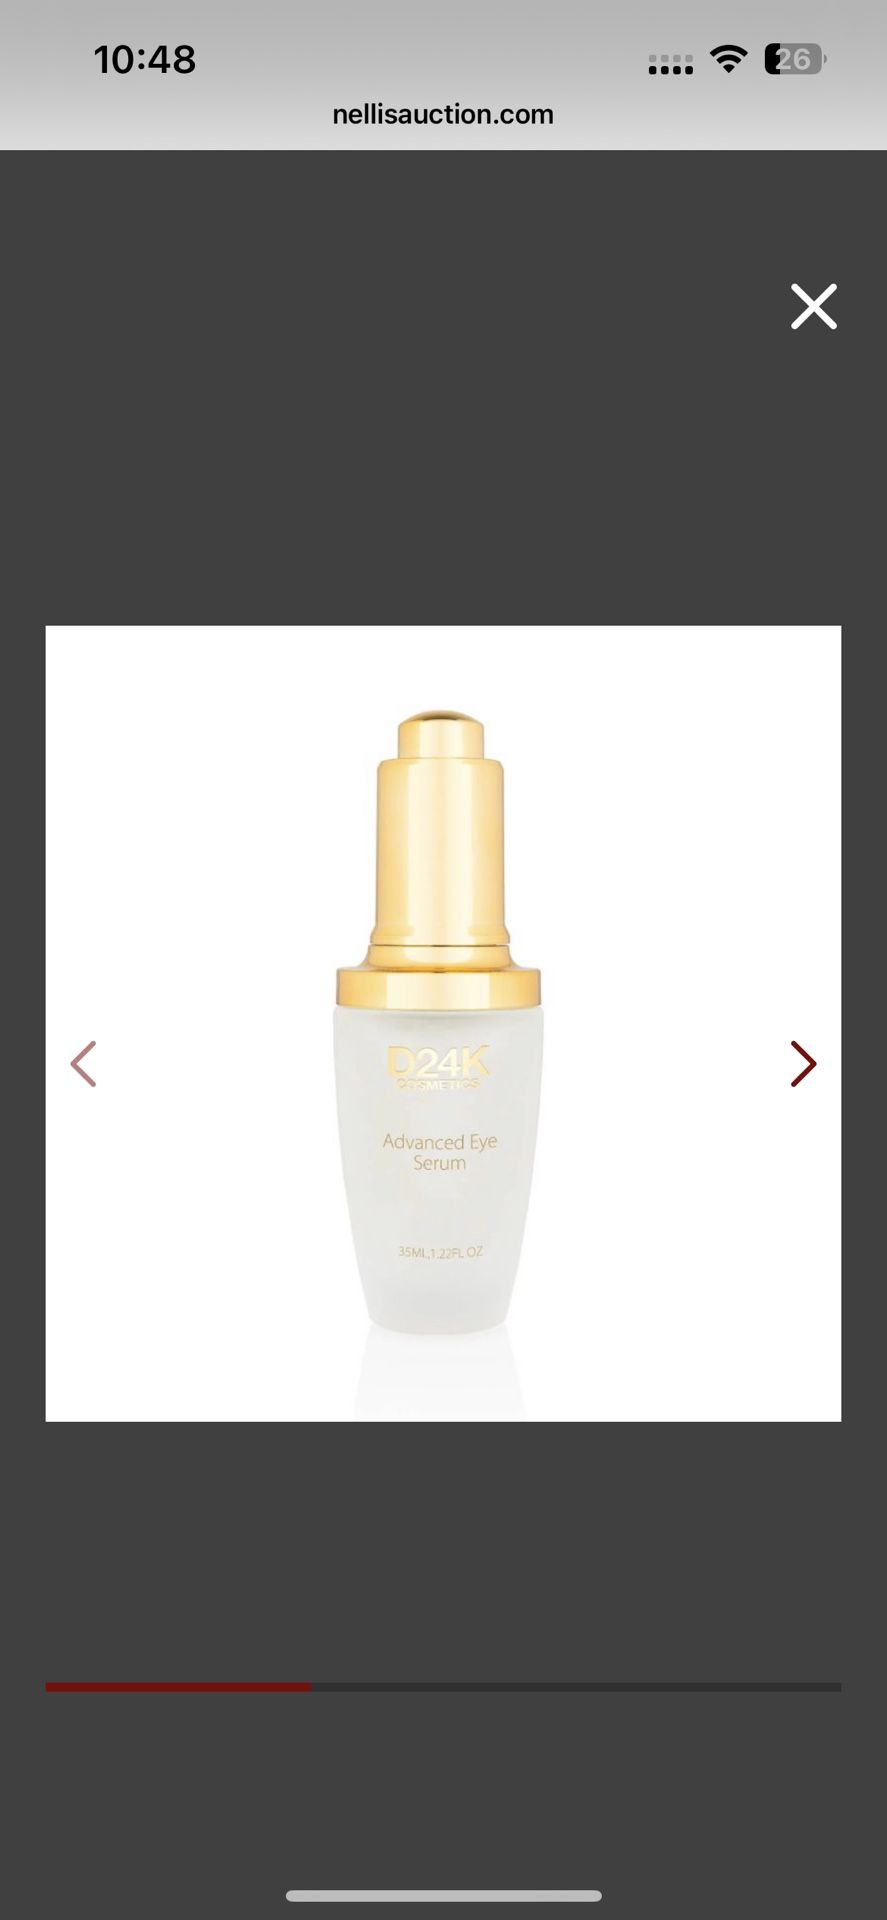 24K Gold Infused Advanced Eye Serum Contours Skin Around The Eyes Reducing Puffiness & Sagging While Lifting & Firming Skin New